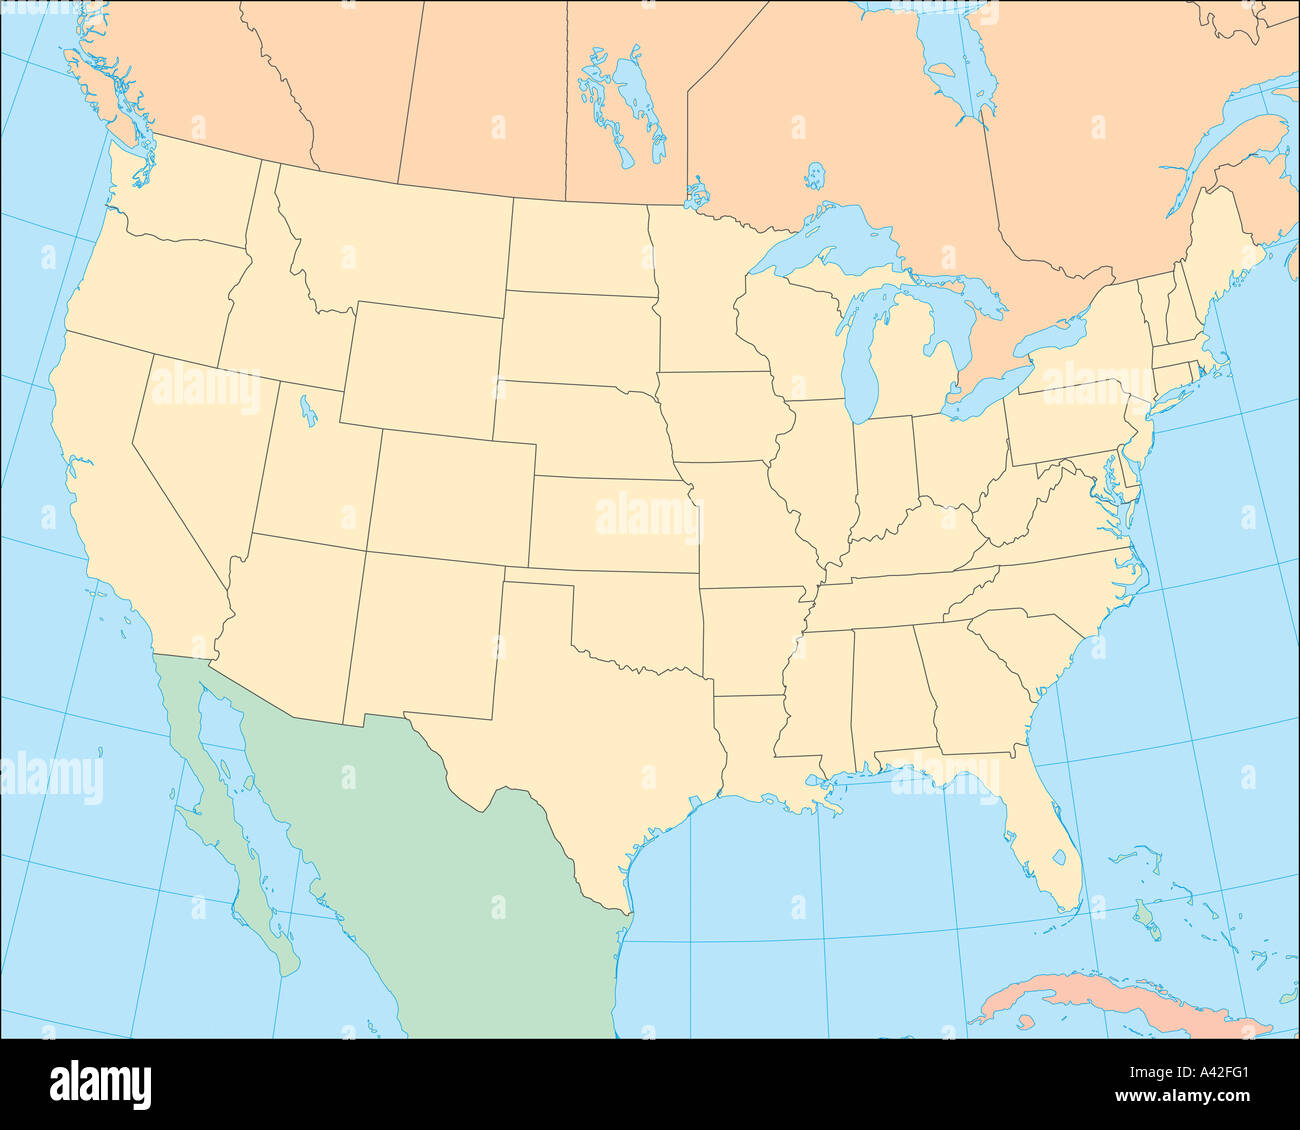 simple outline map showing usa and canada with states and provinces